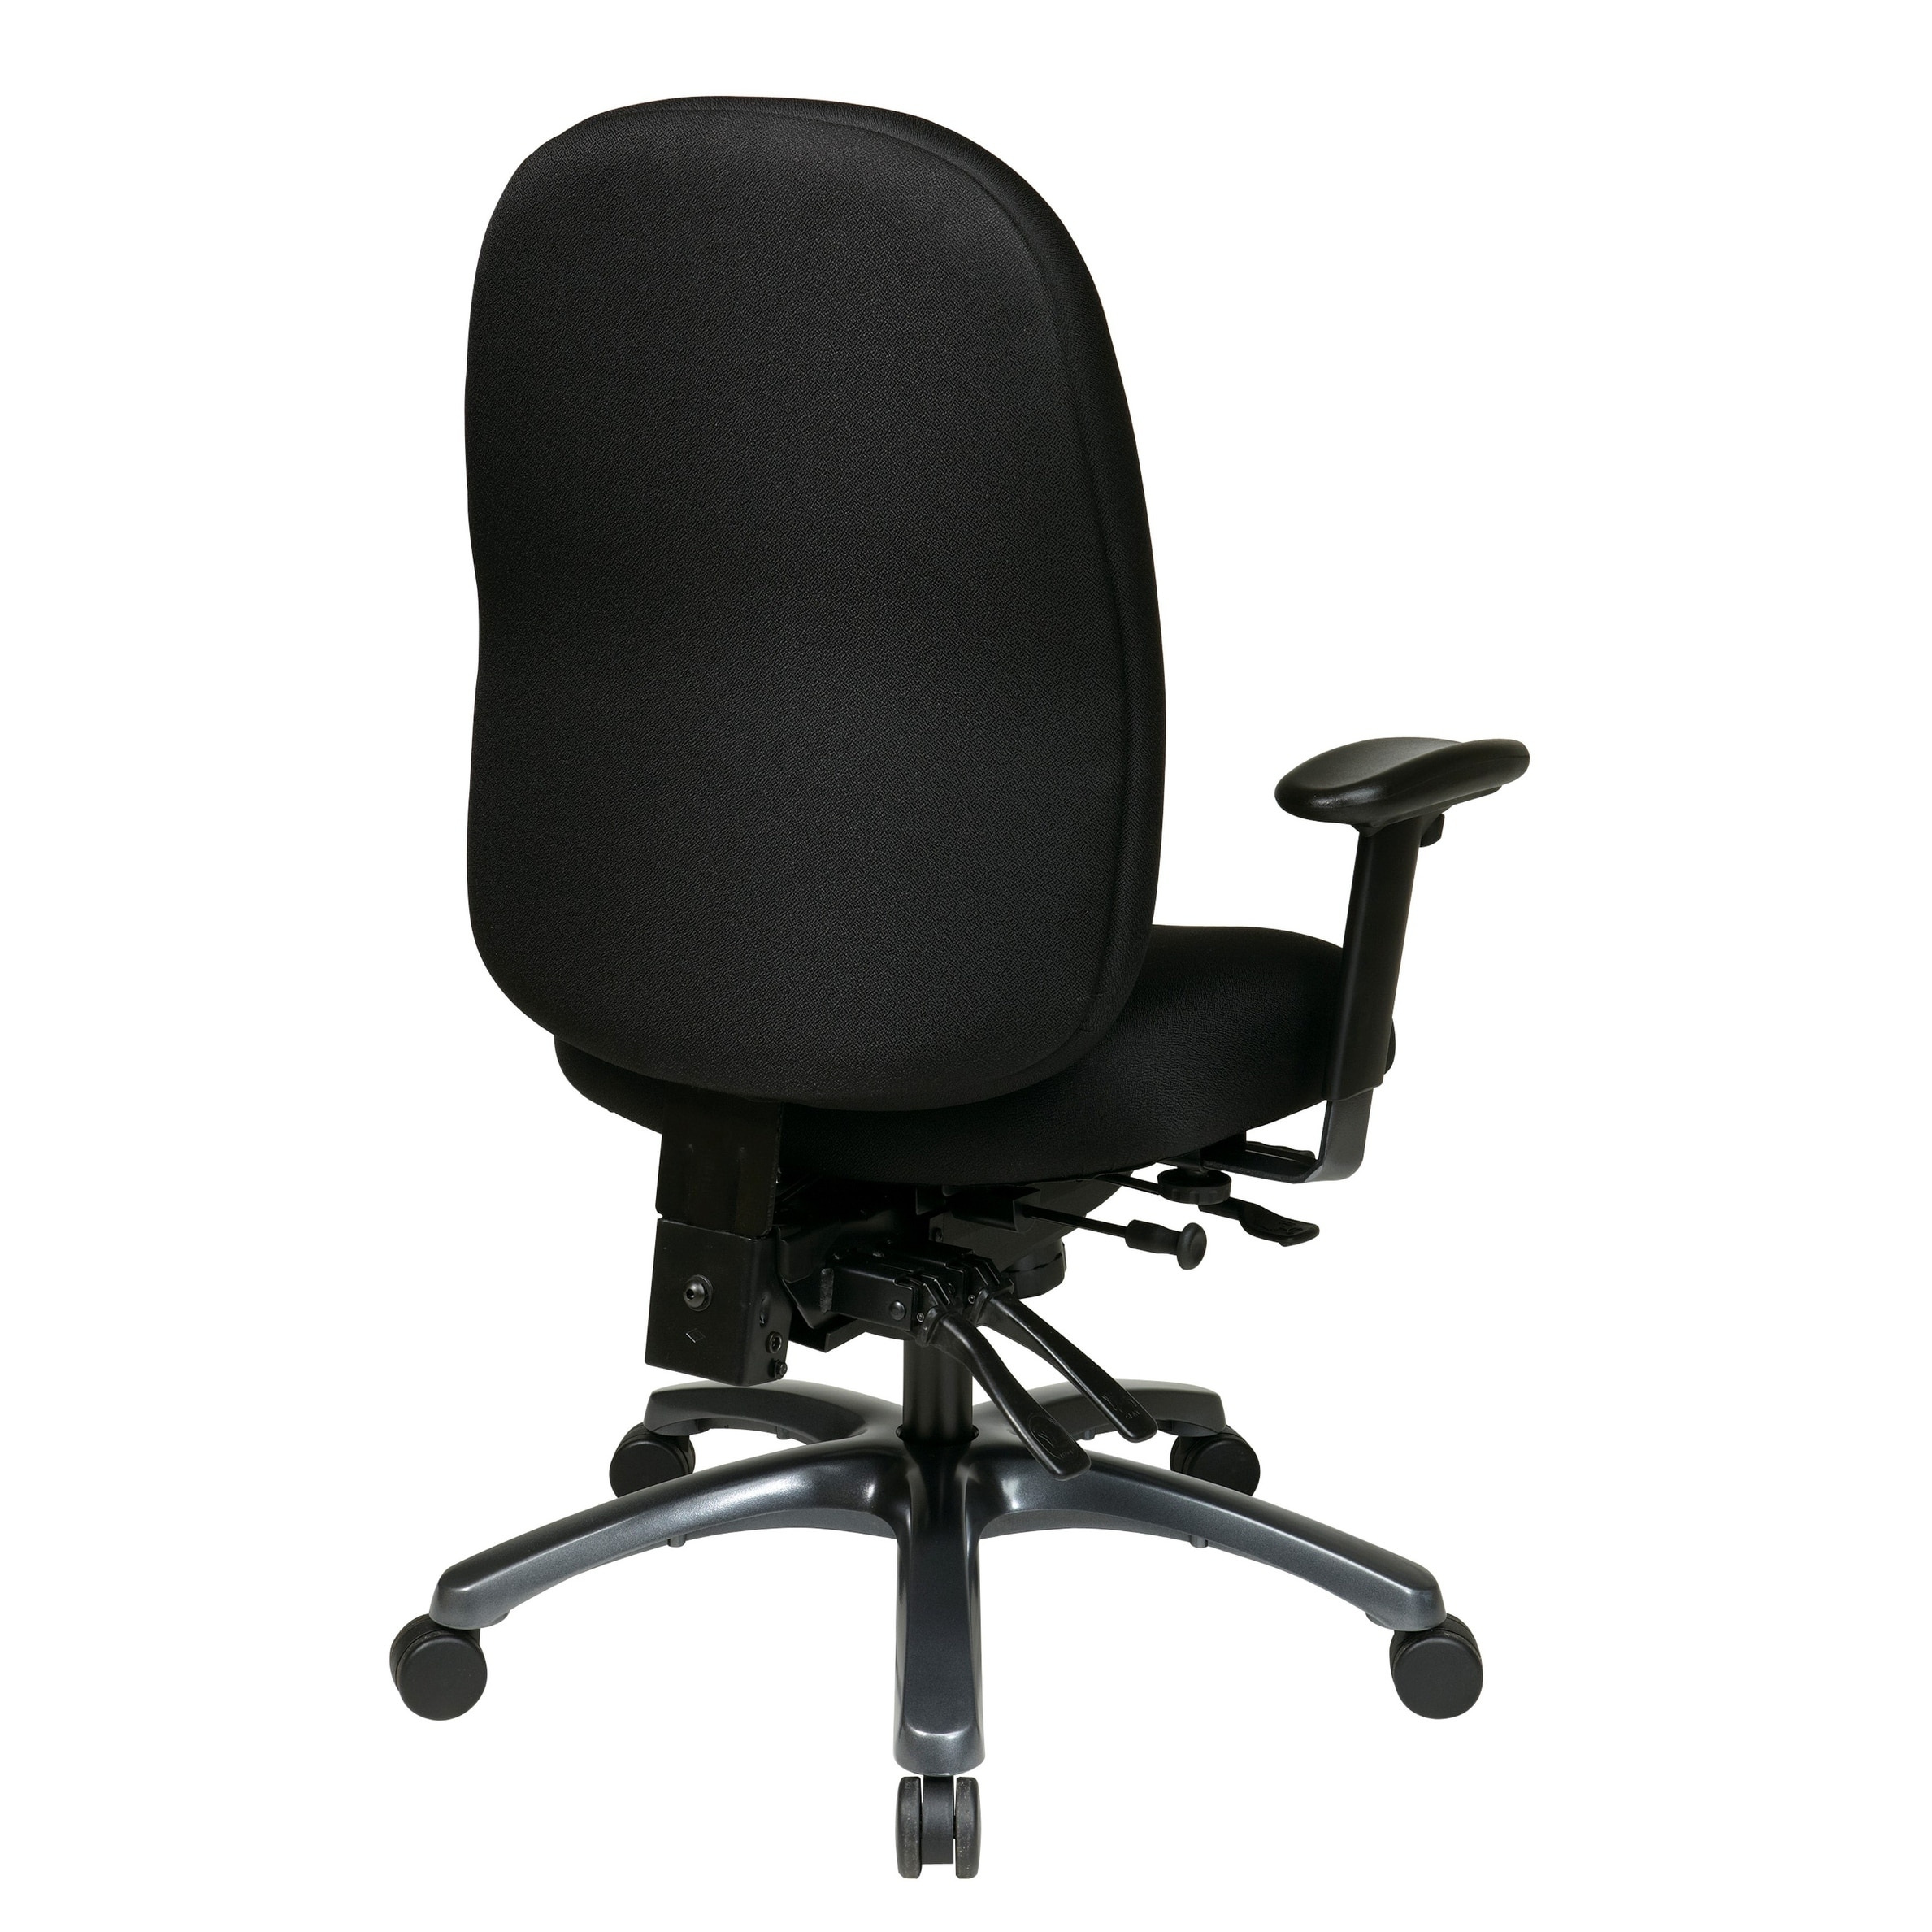 Multi-Function High-Back Office Chair with Seat Slider and ...